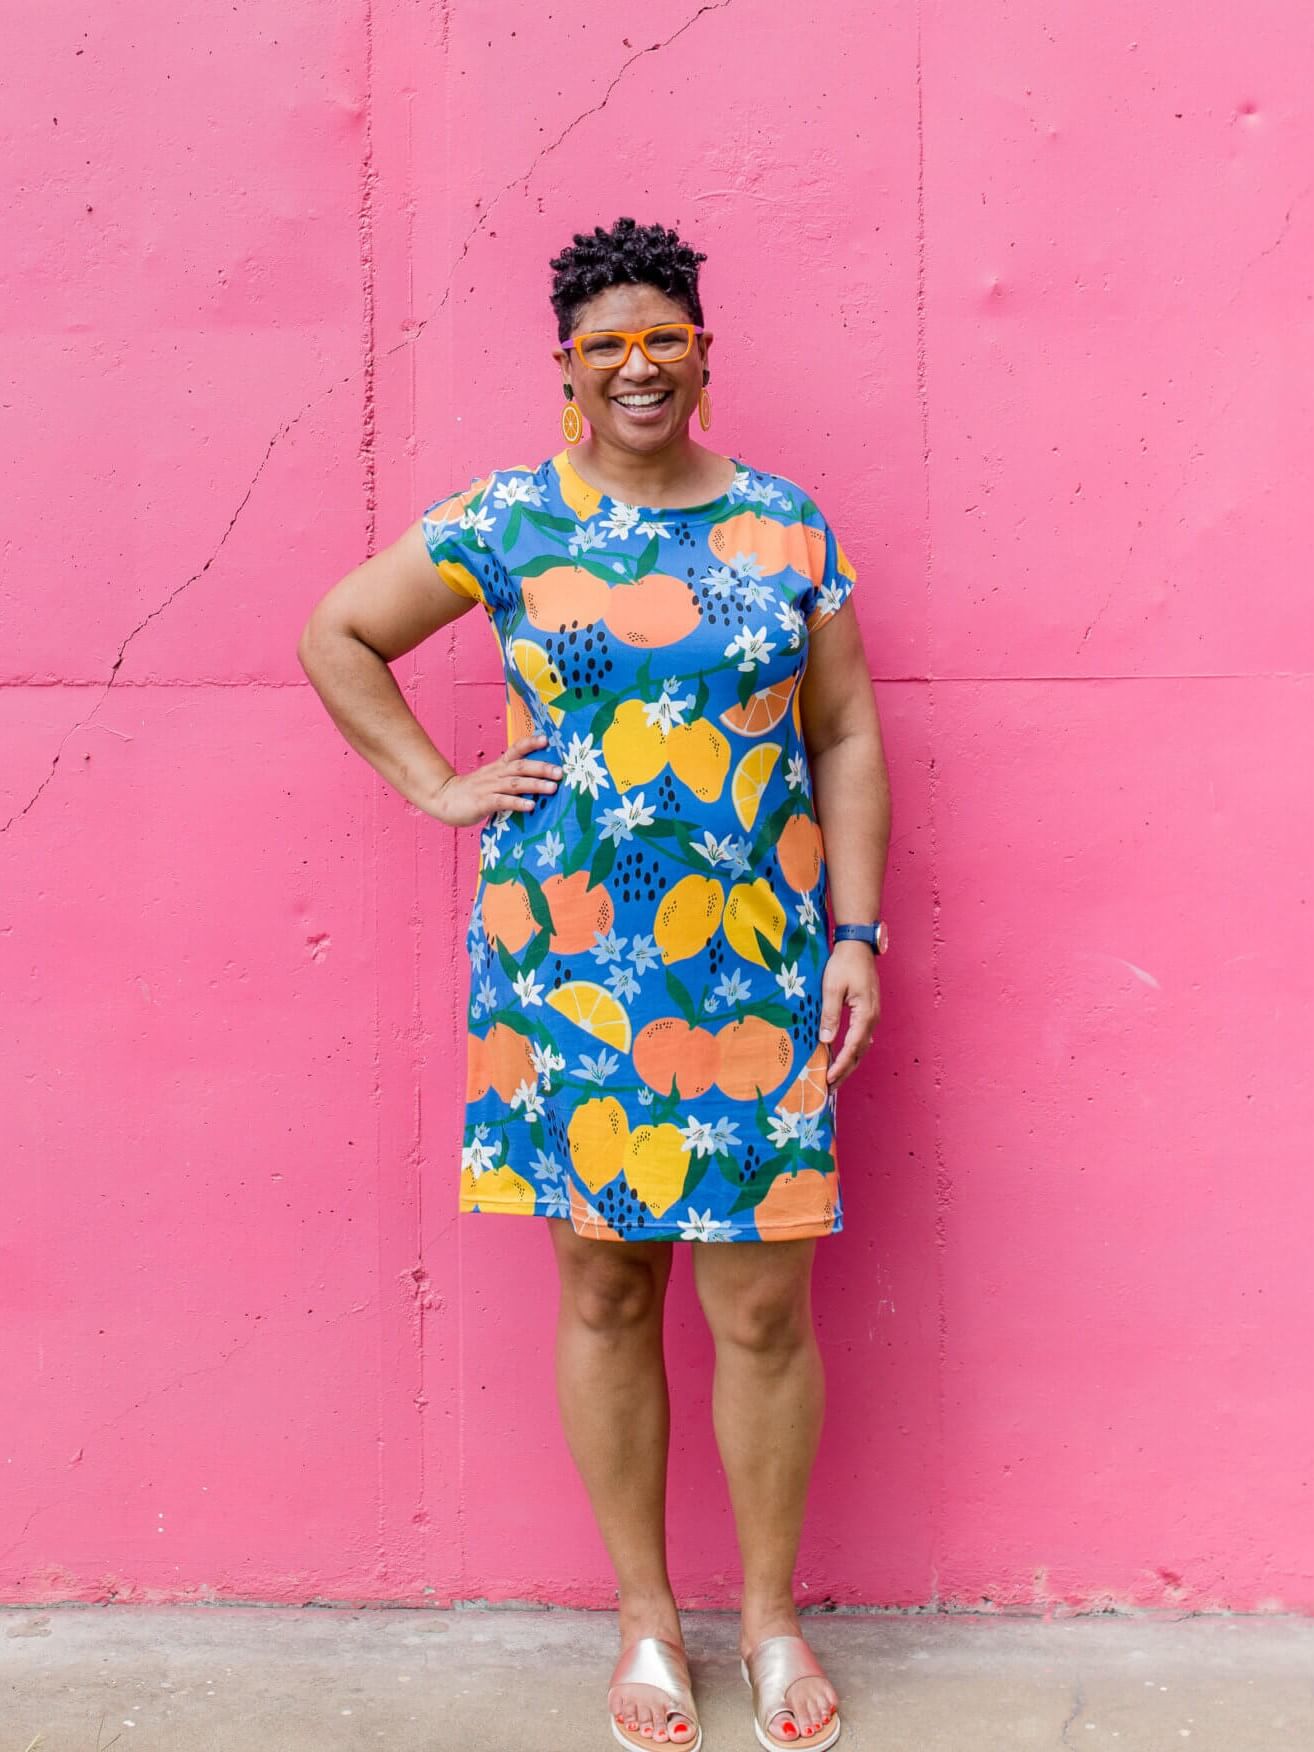 Do you love bold, colourful quirky dresses?